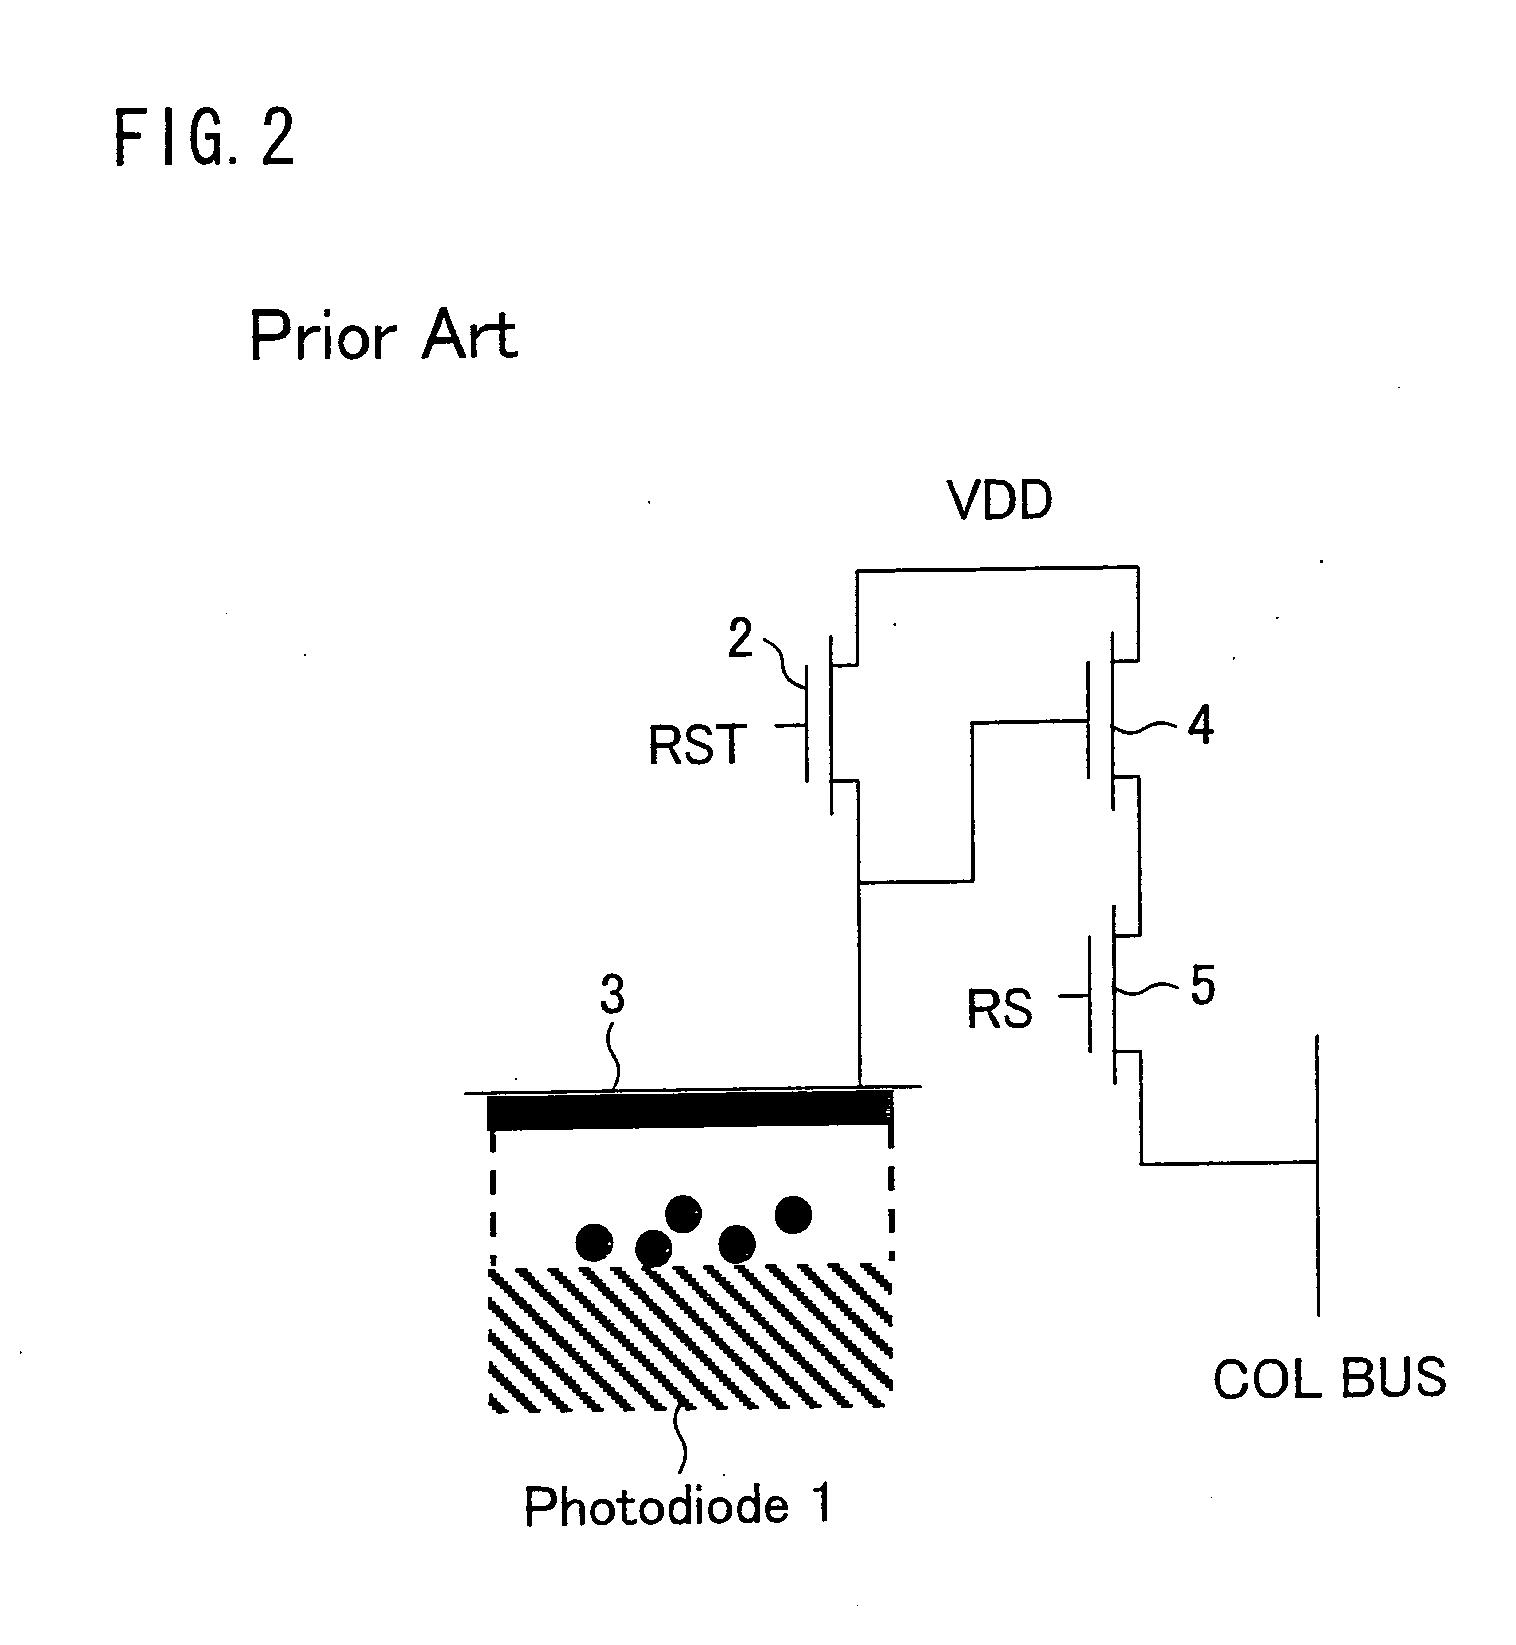 Combined image sensor and display device